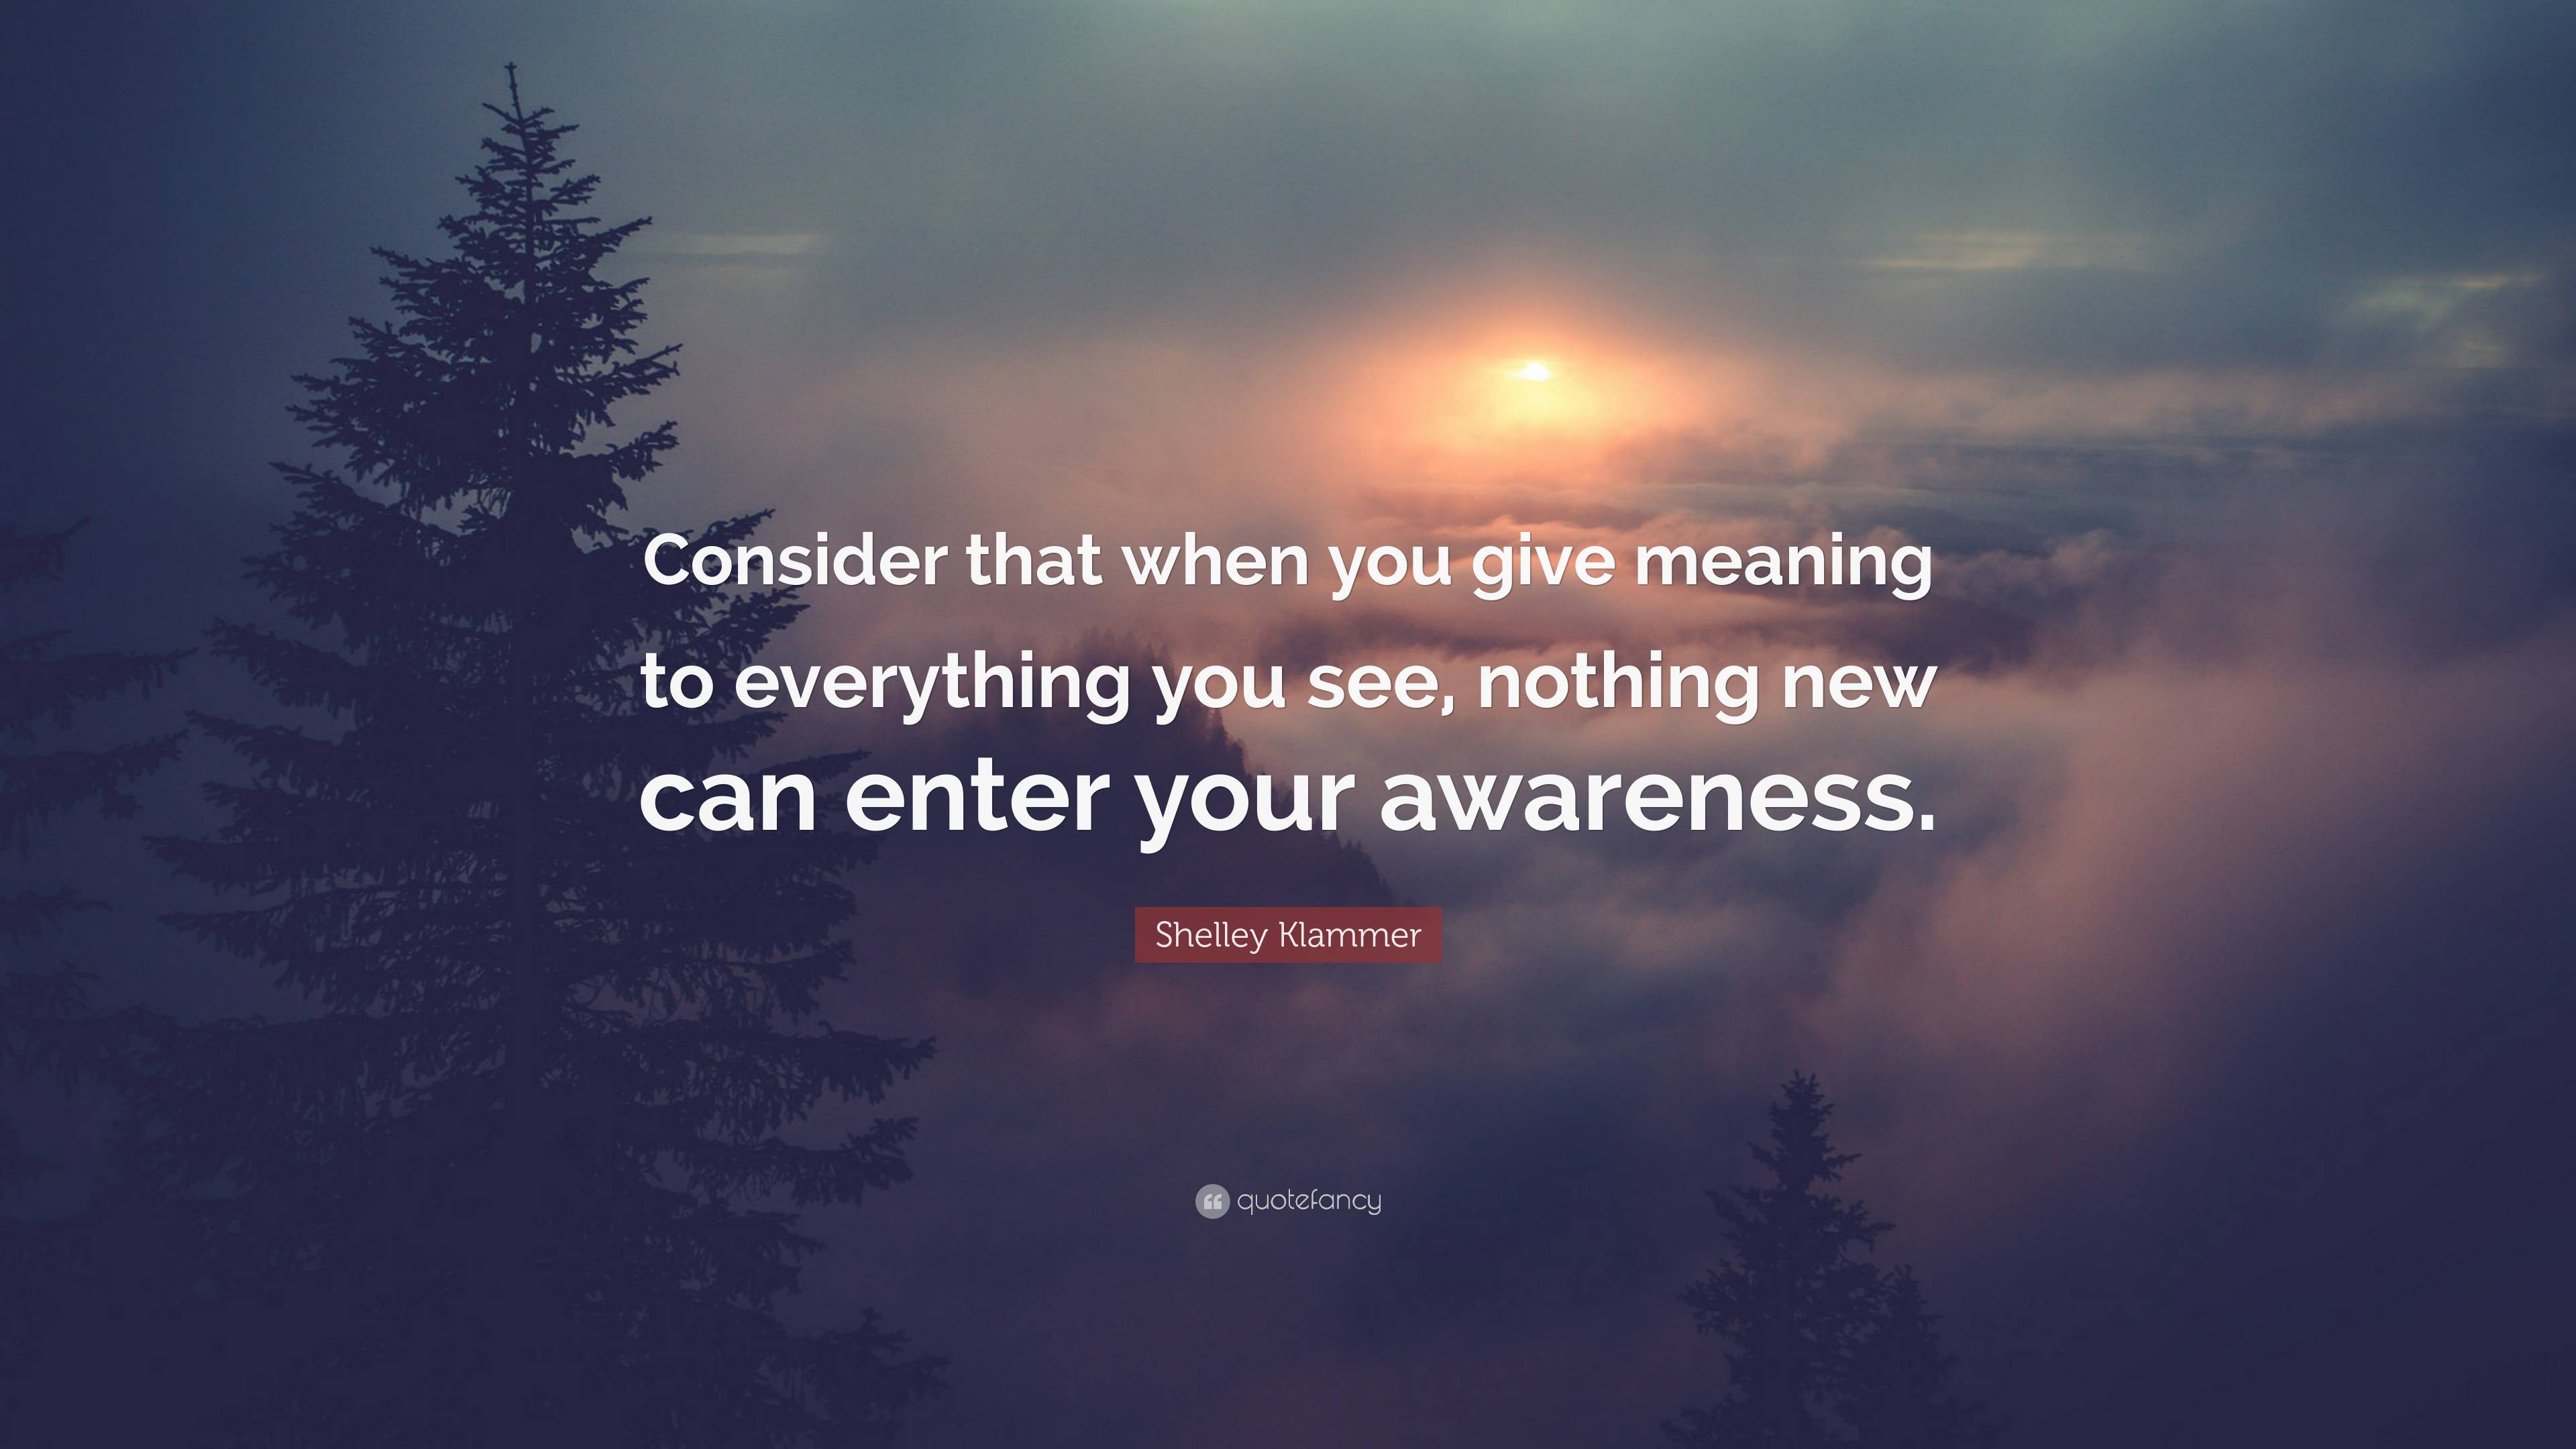 Shelley Klammer Quote: “Consider that when you give meaning to